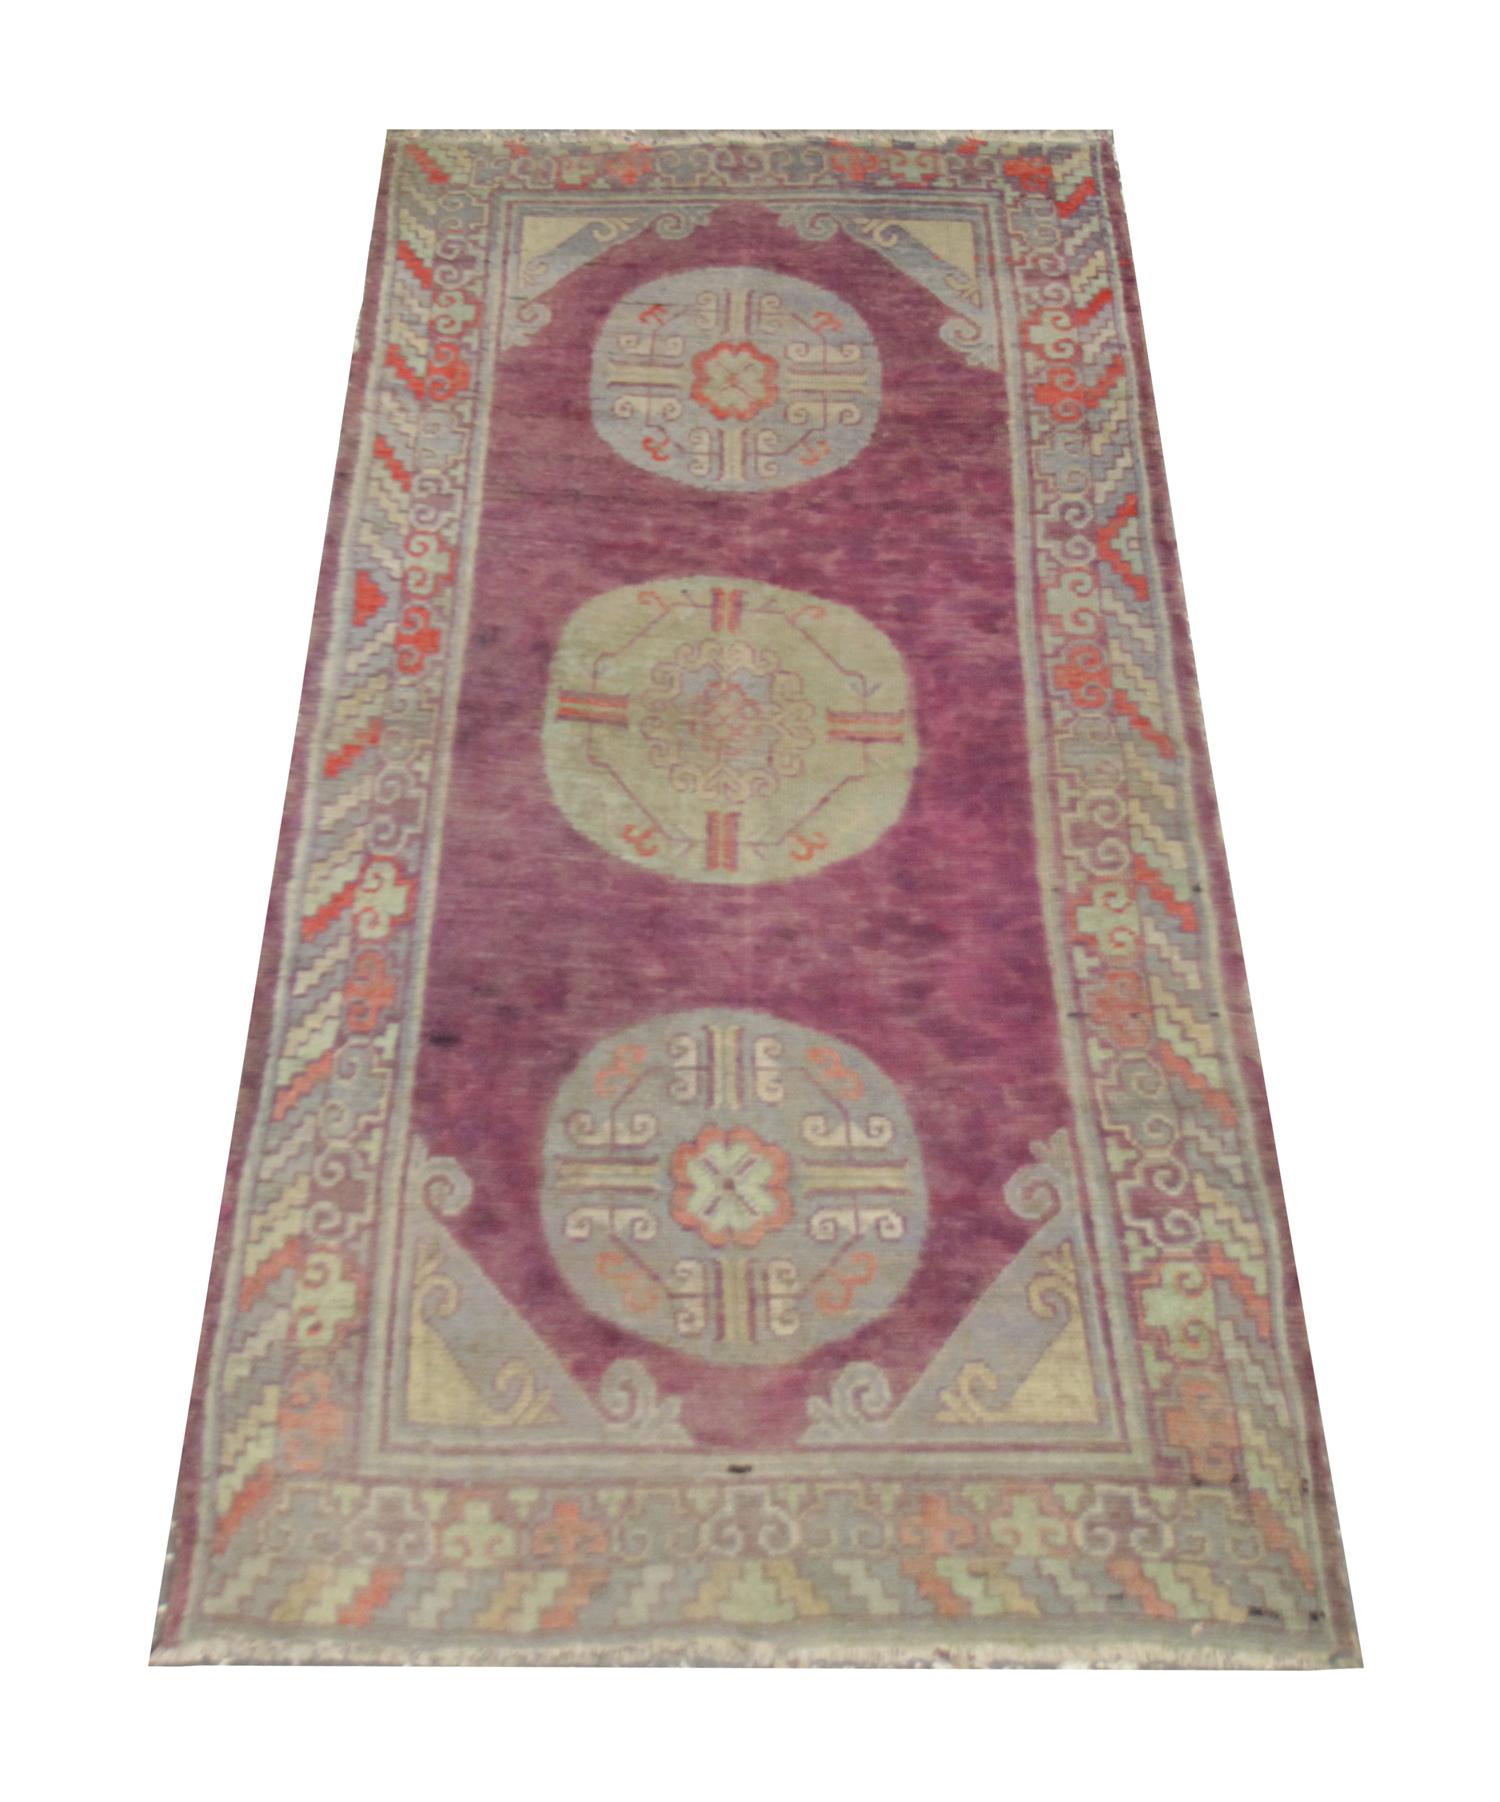 Handmade carpet Oriental rug truly unique in design and color this high-quality antique Central Asian Khotan Rug is perfect for any contemporary or traditional interior. The central design features thee circular emblems in green and blue with